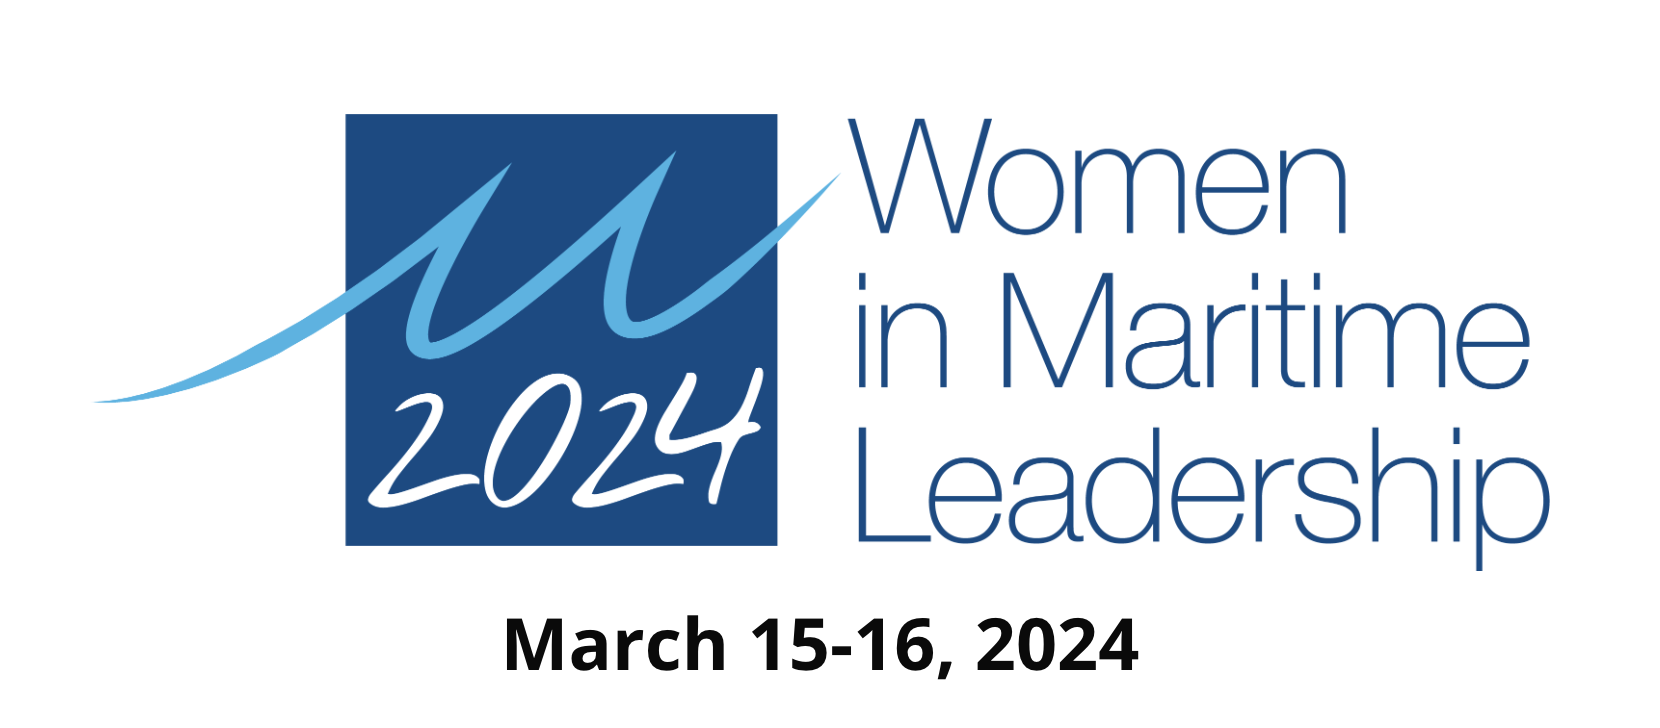 Save the Date: Women in Maritime Leadership Conference Set for March 15-16, 2024